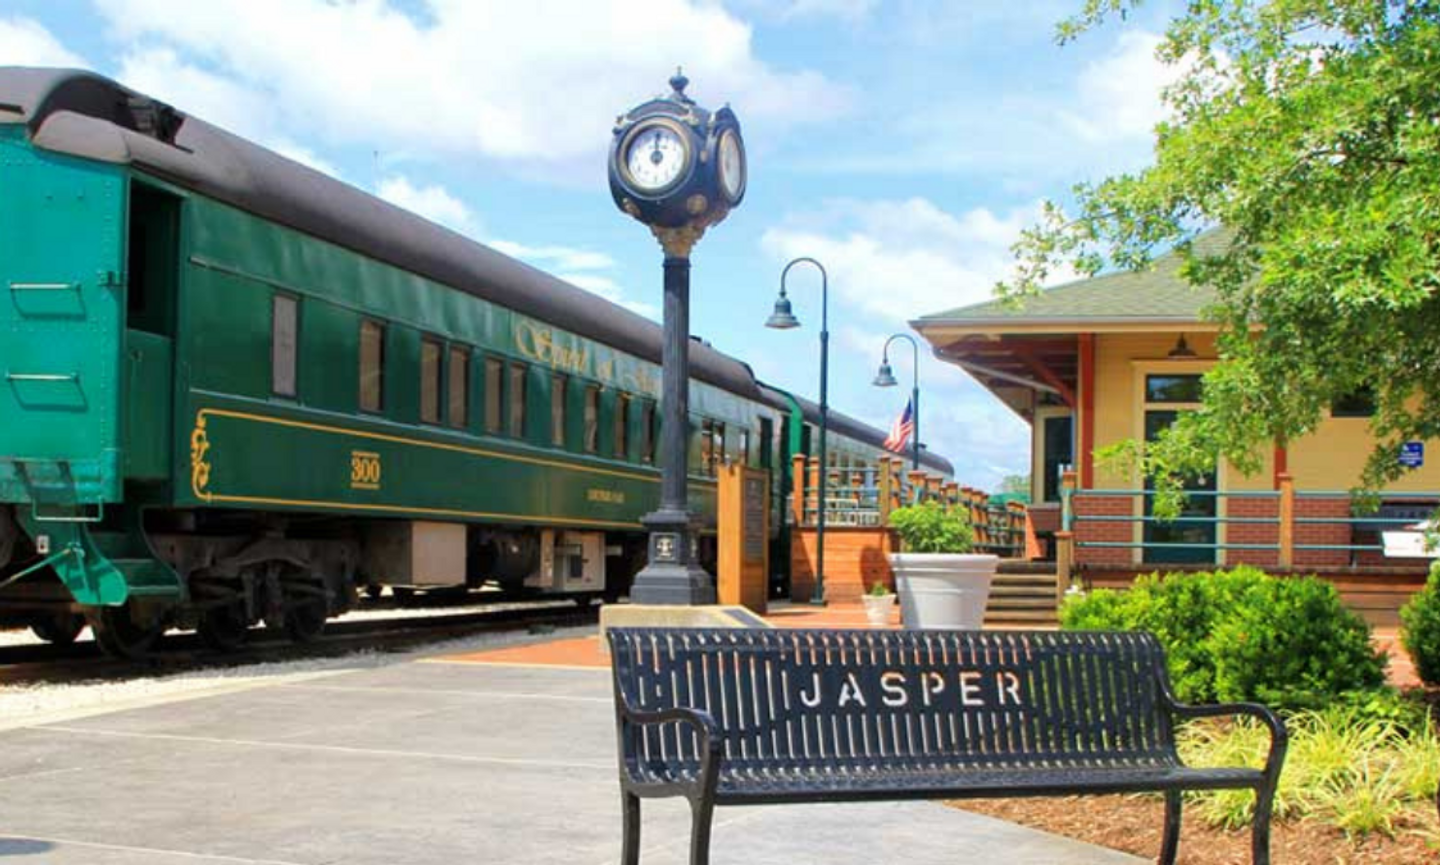 Get paid to live in Jasper, Indiana